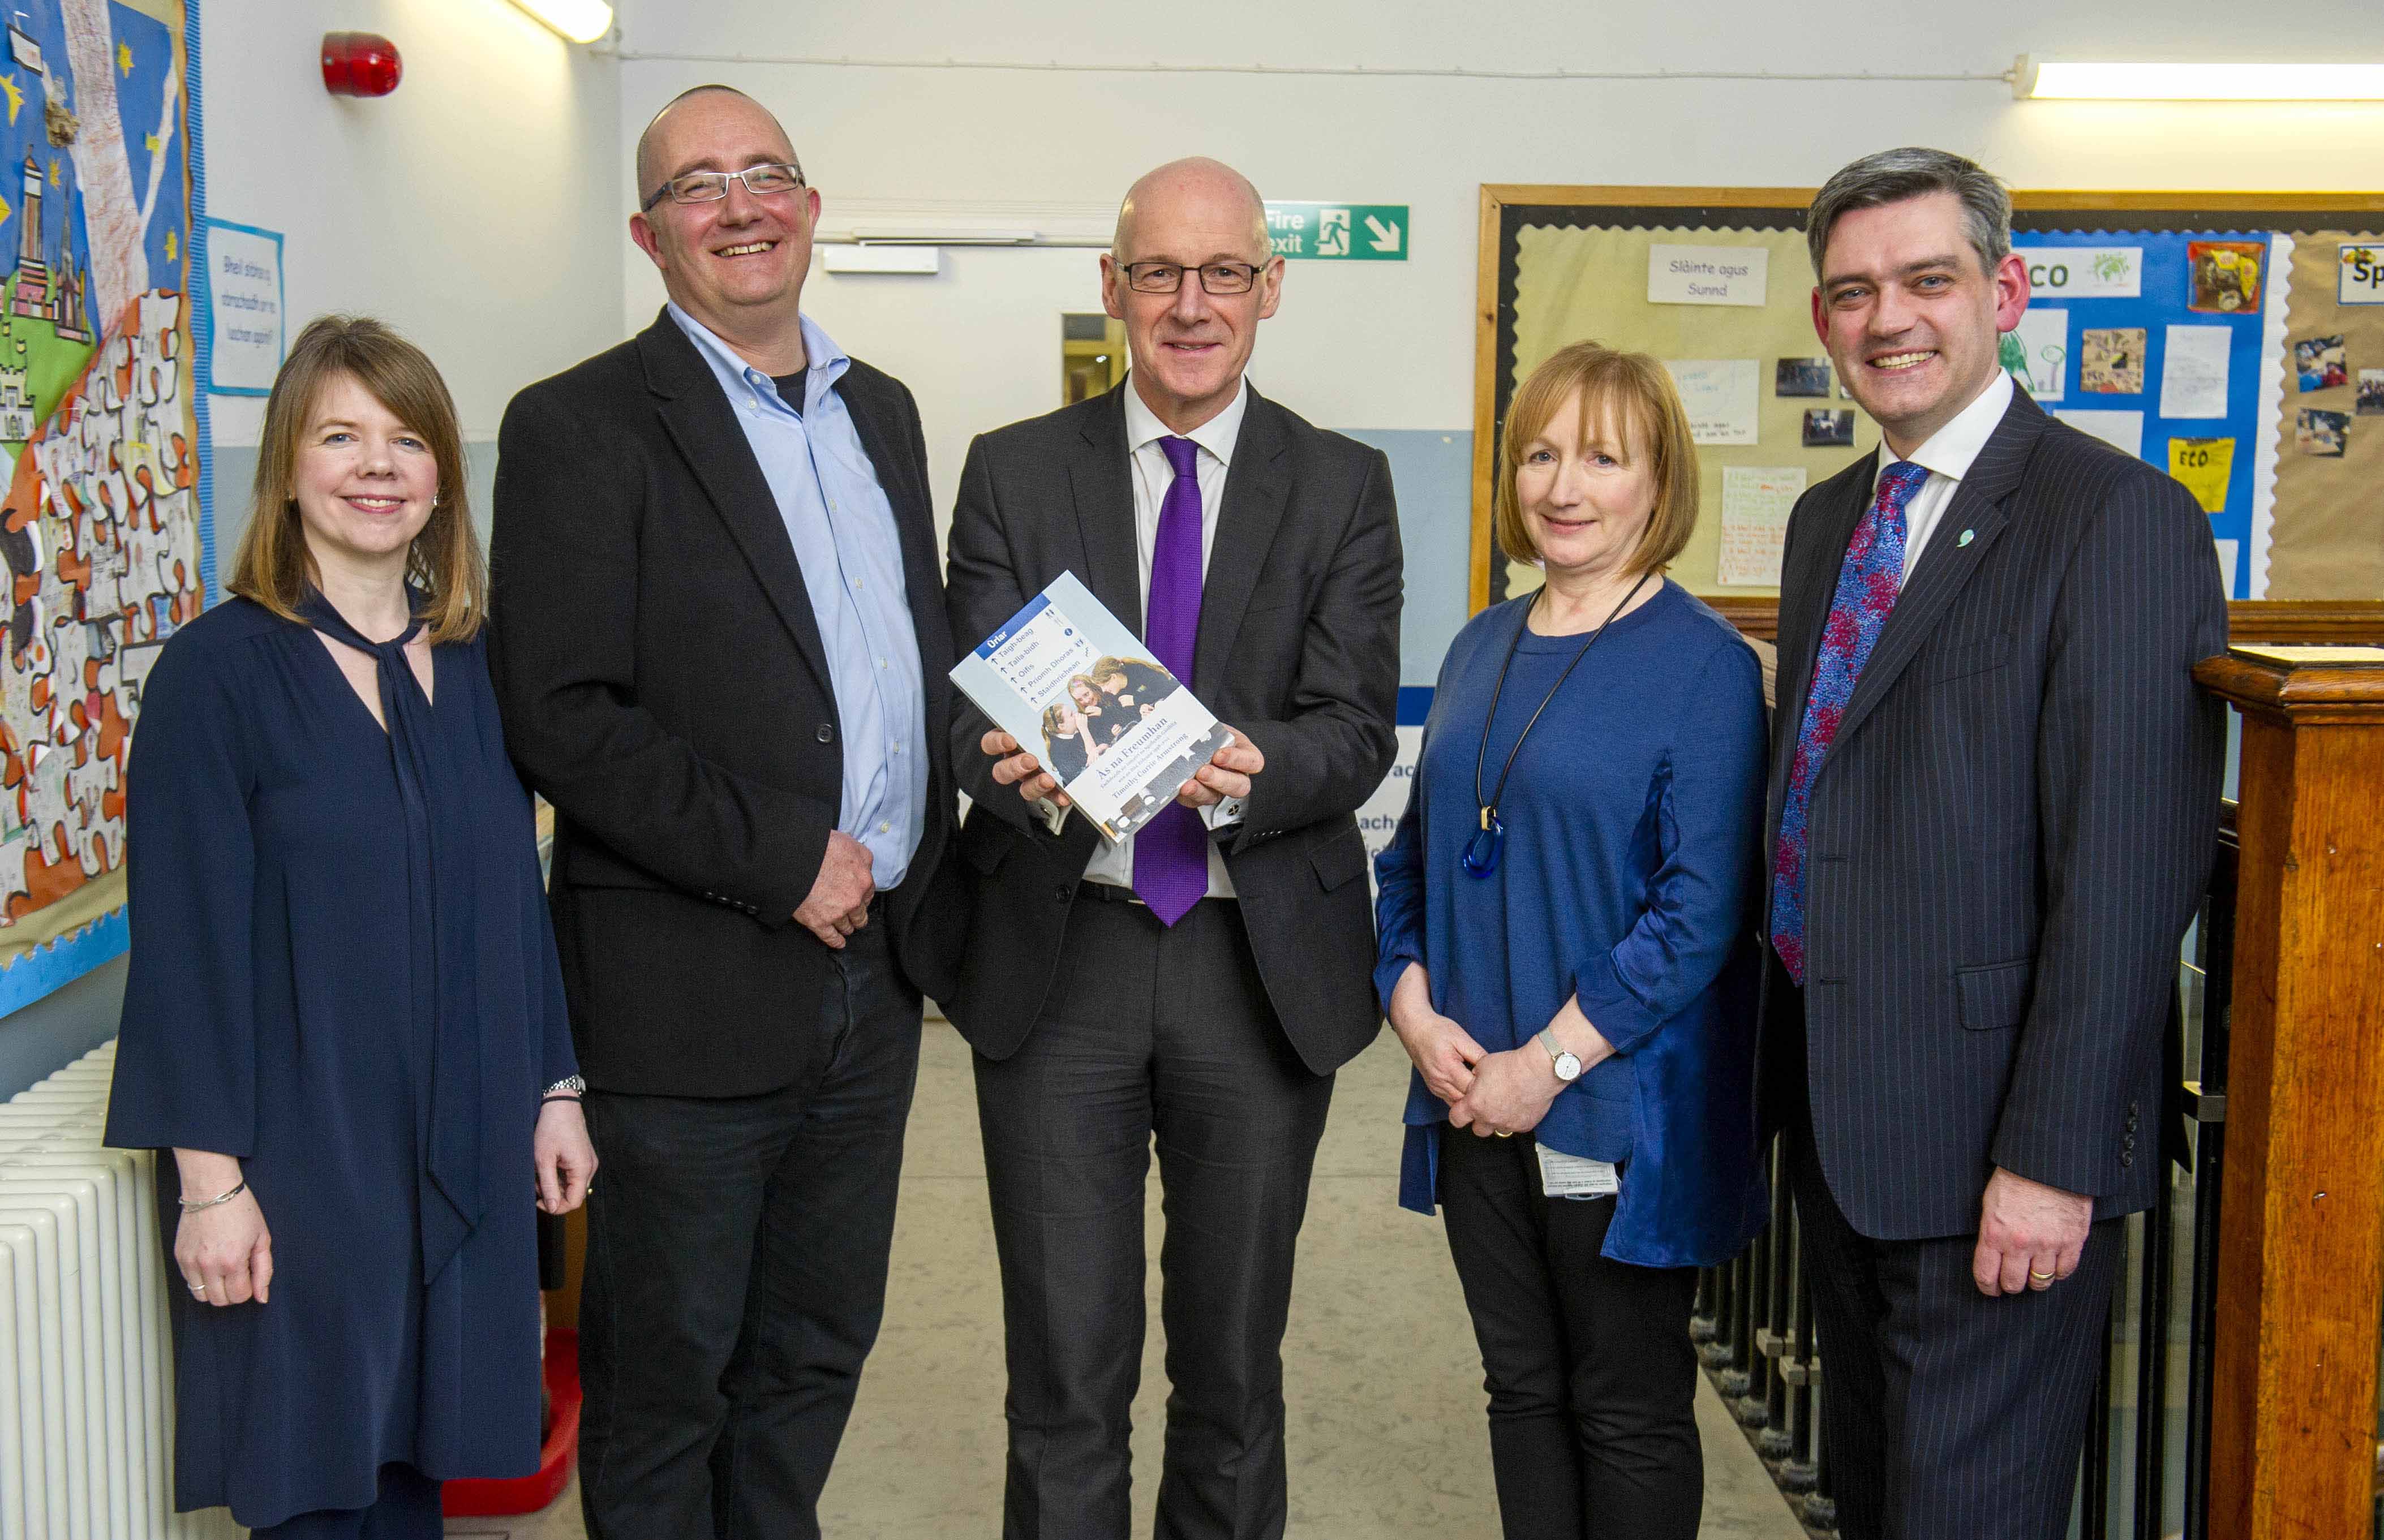 Deputy First Minister launches a history of the Gaelic School Campaign in Edinburgh